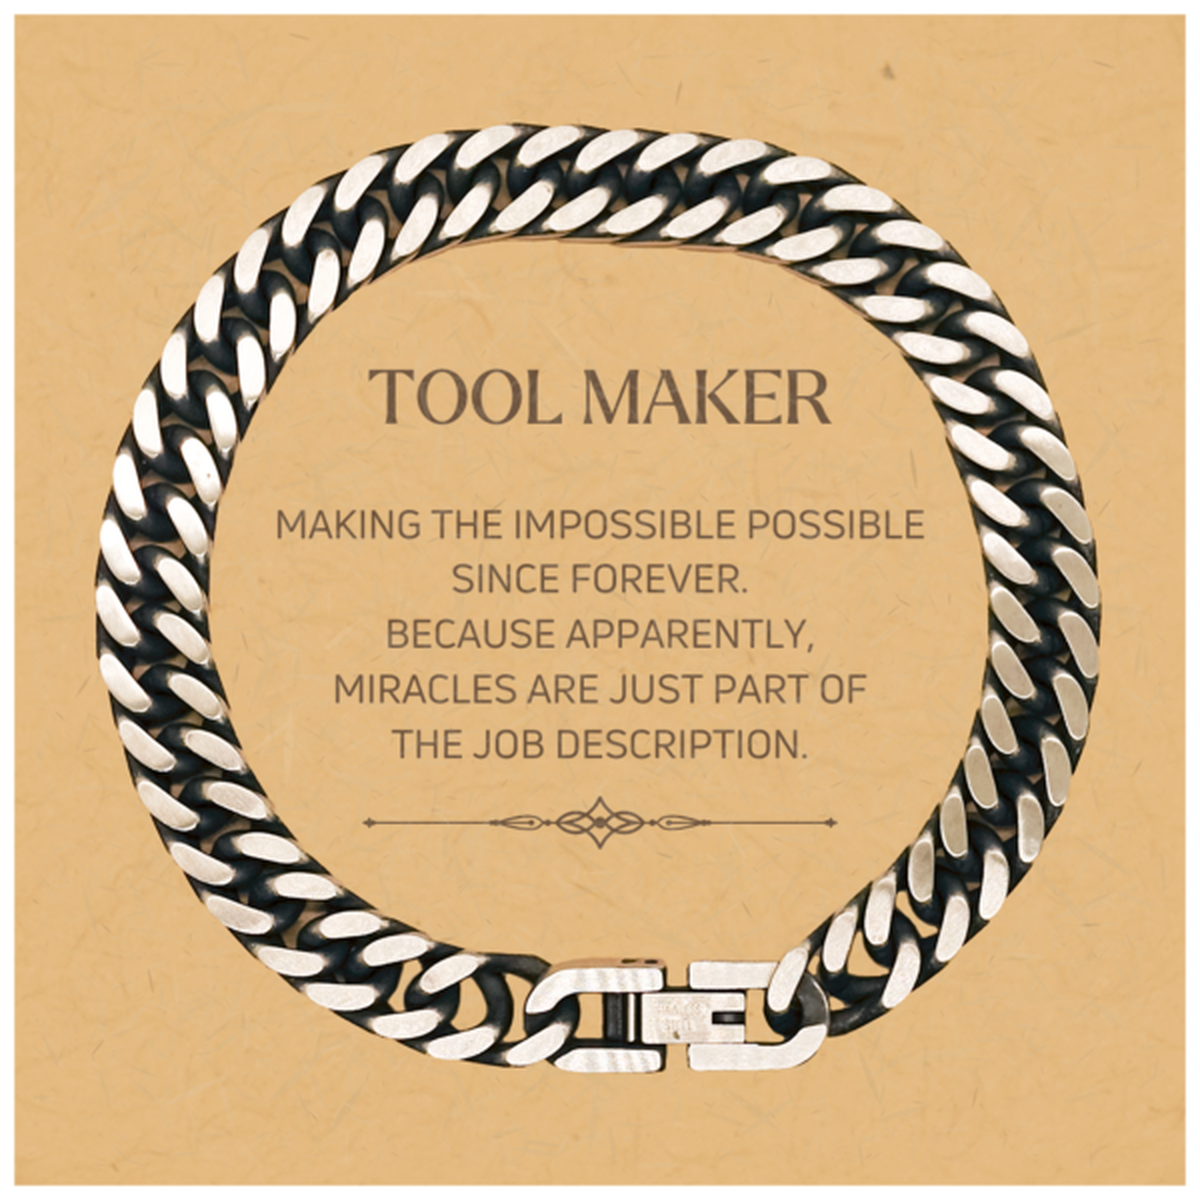 Funny Tool Maker Gifts, Miracles are just part of the job description, Inspirational Birthday Christmas Cuban Link Chain Bracelet For Tool Maker, Men, Women, Coworkers, Friends, Boss